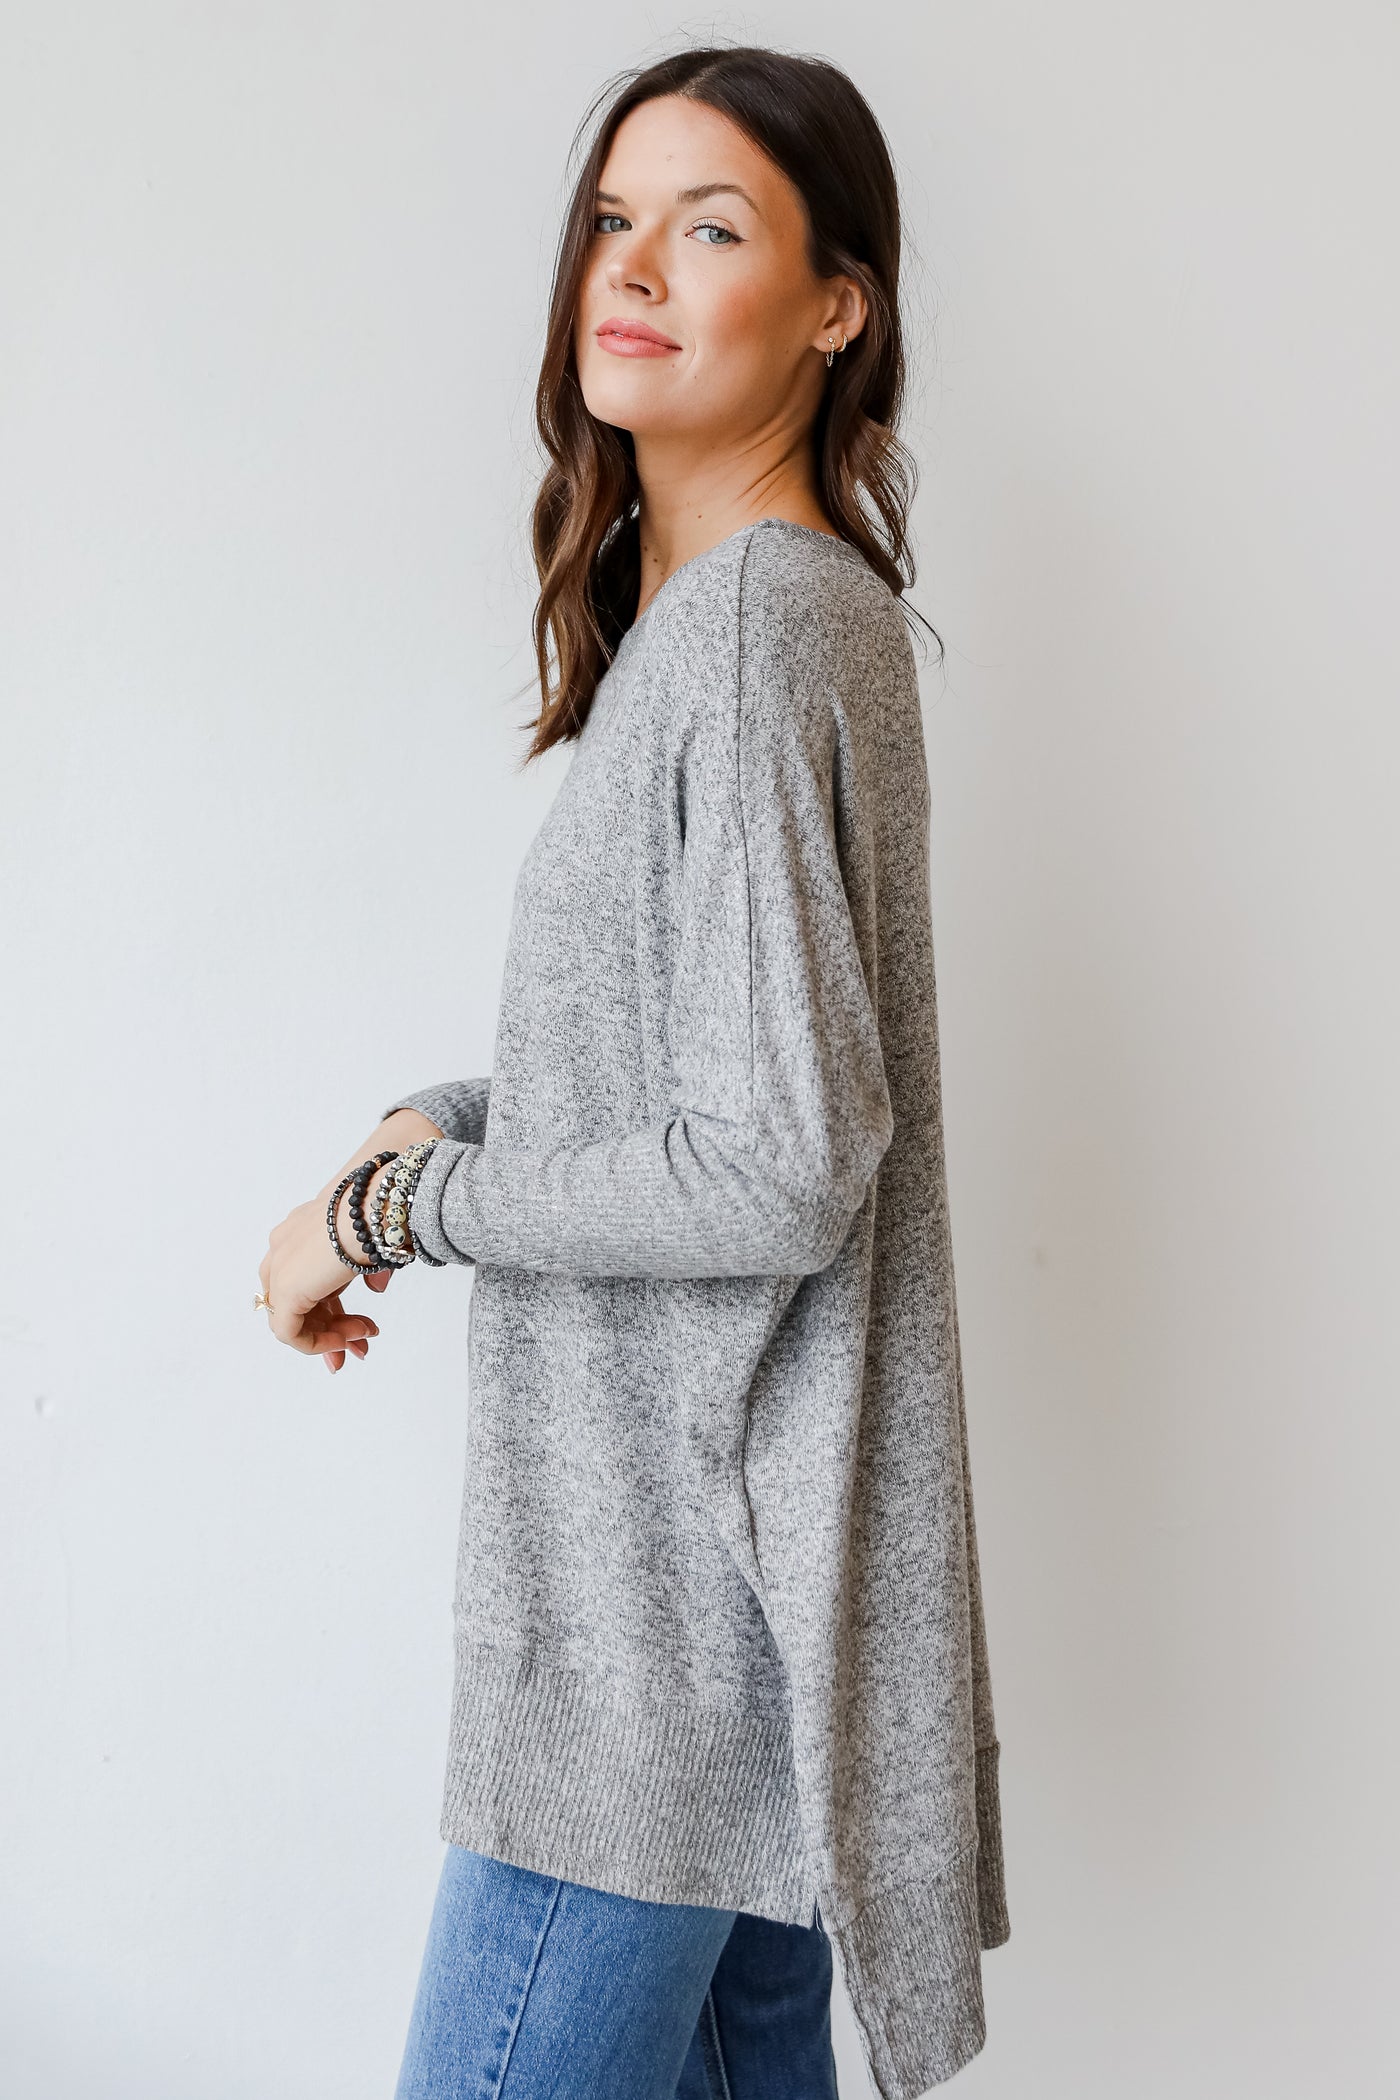 Brushed Knit Top in heather grey side view